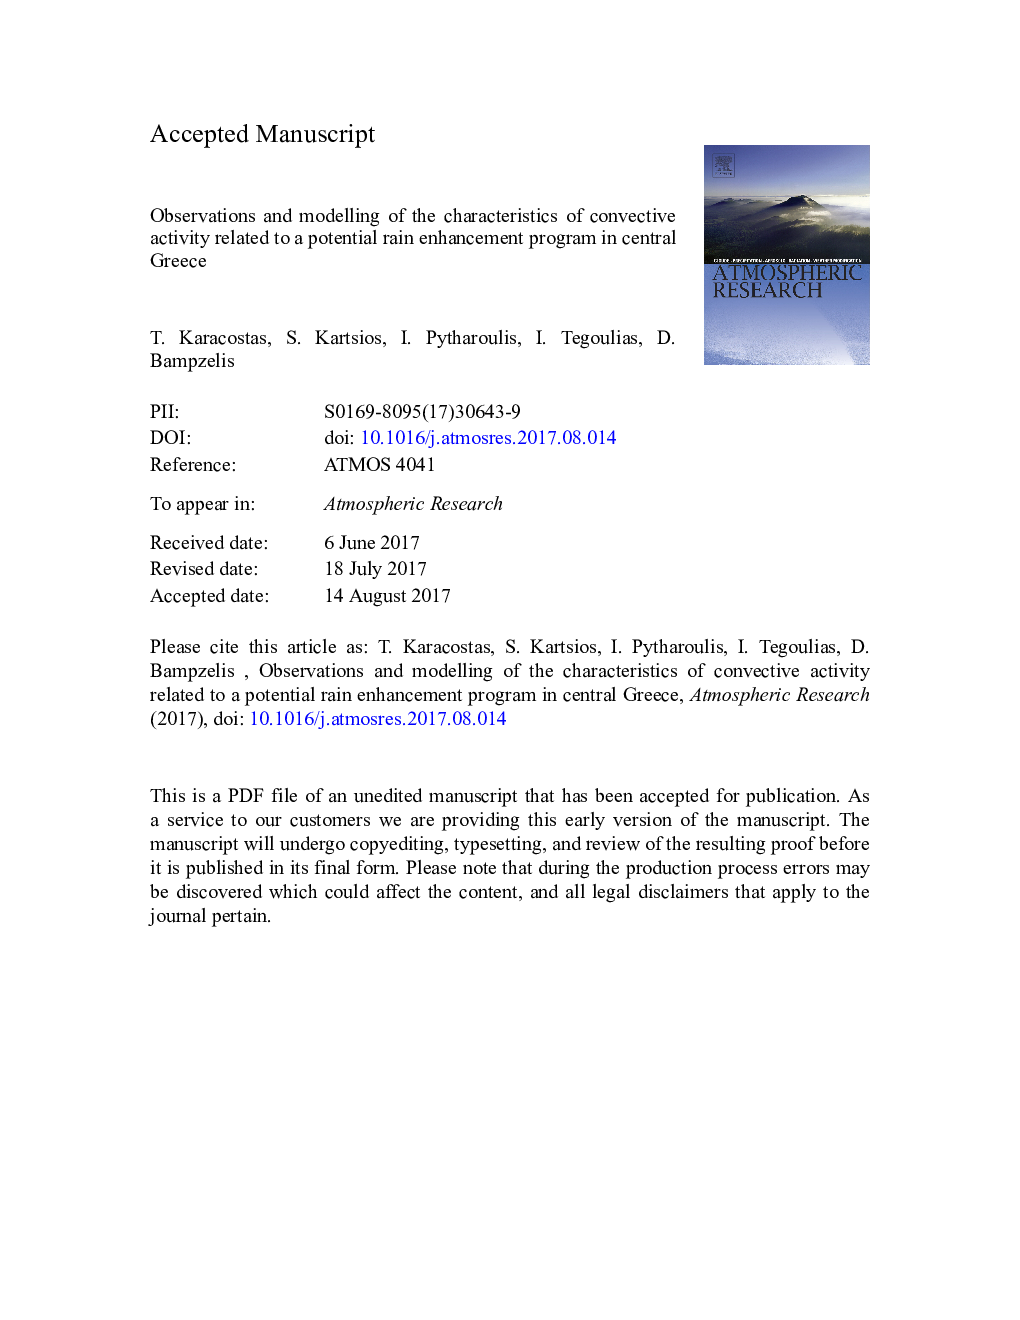 Observations and modelling of the characteristics of convective activity related to a potential rain enhancement program in central Greece